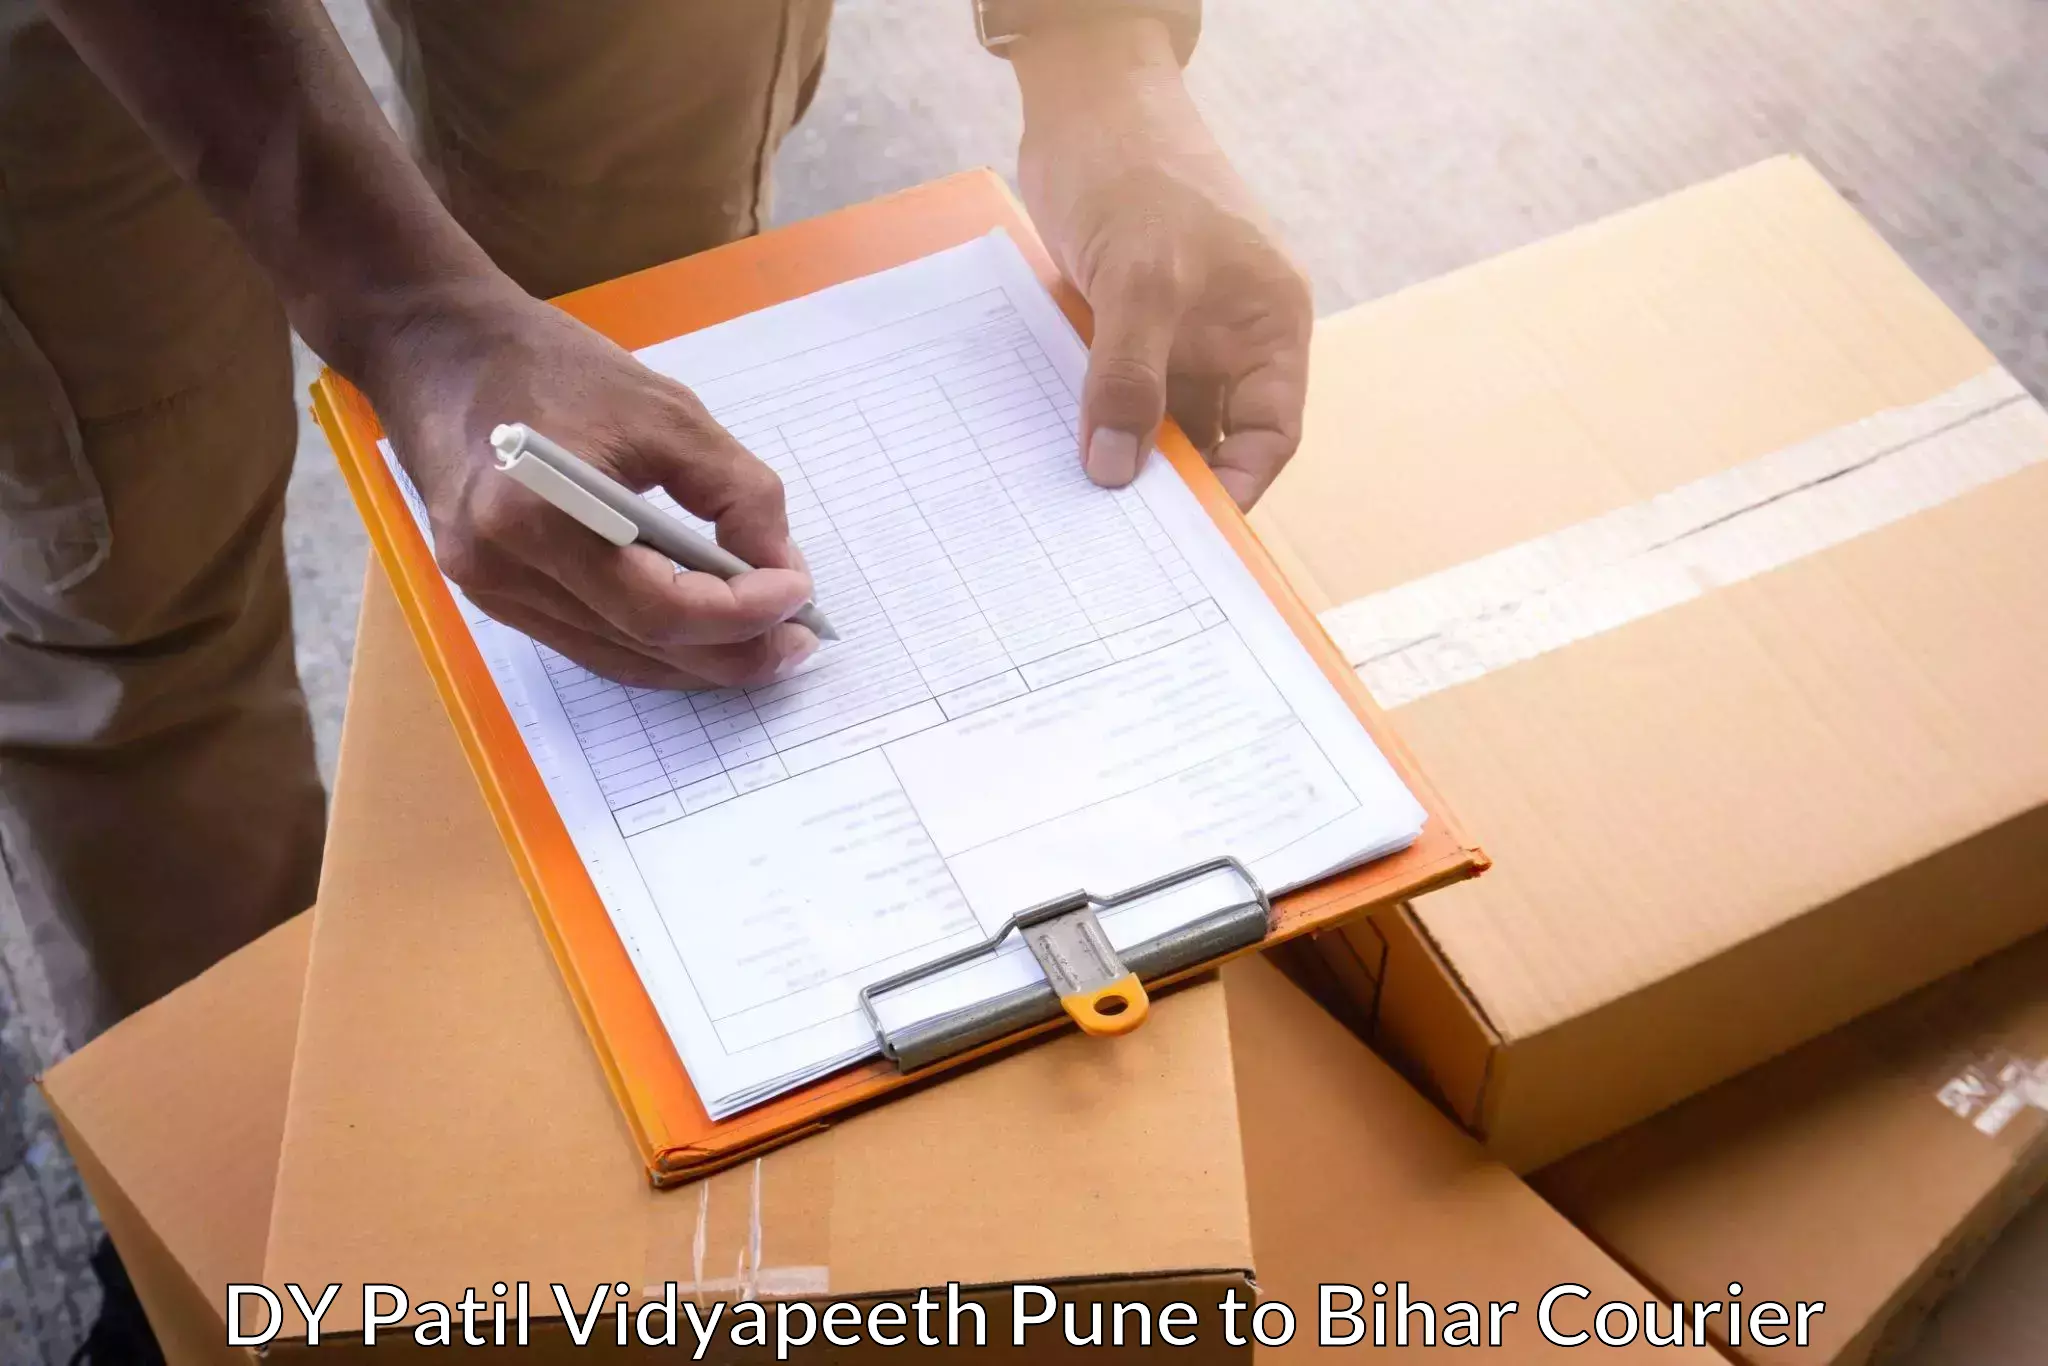 24/7 courier service DY Patil Vidyapeeth Pune to Rusera